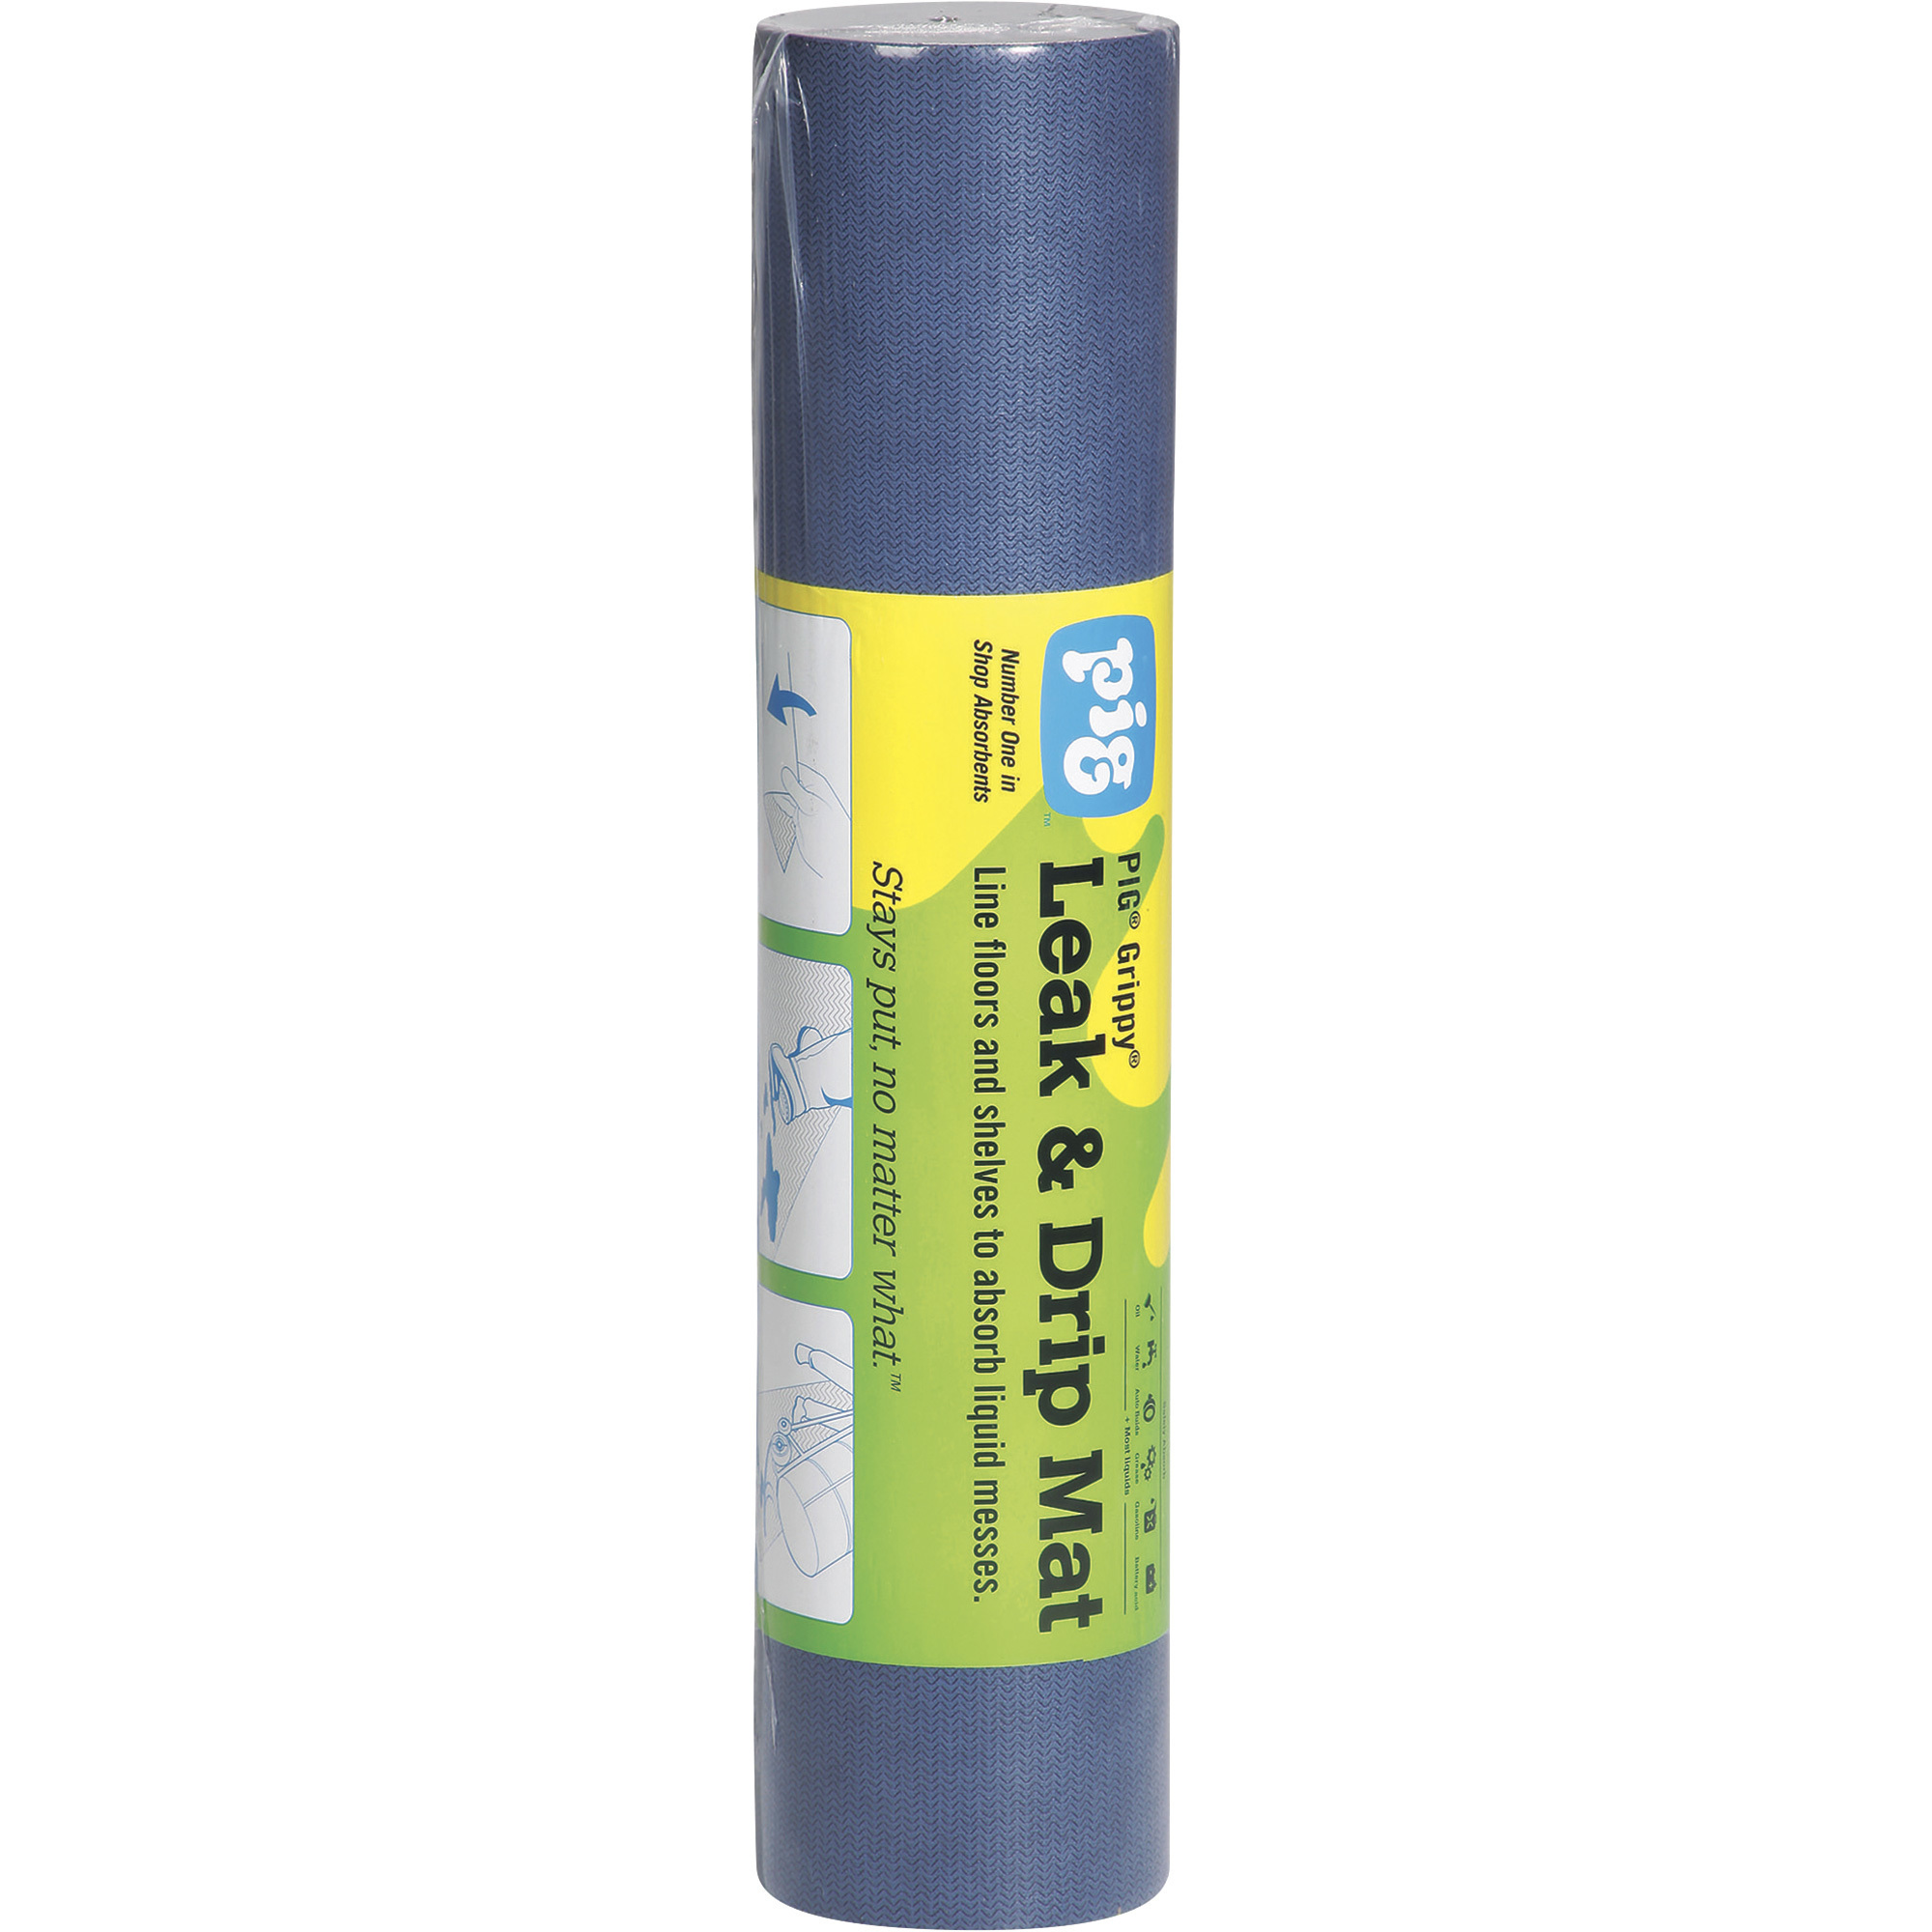 Absorbent Mat Roll for Chemicals - New Pig